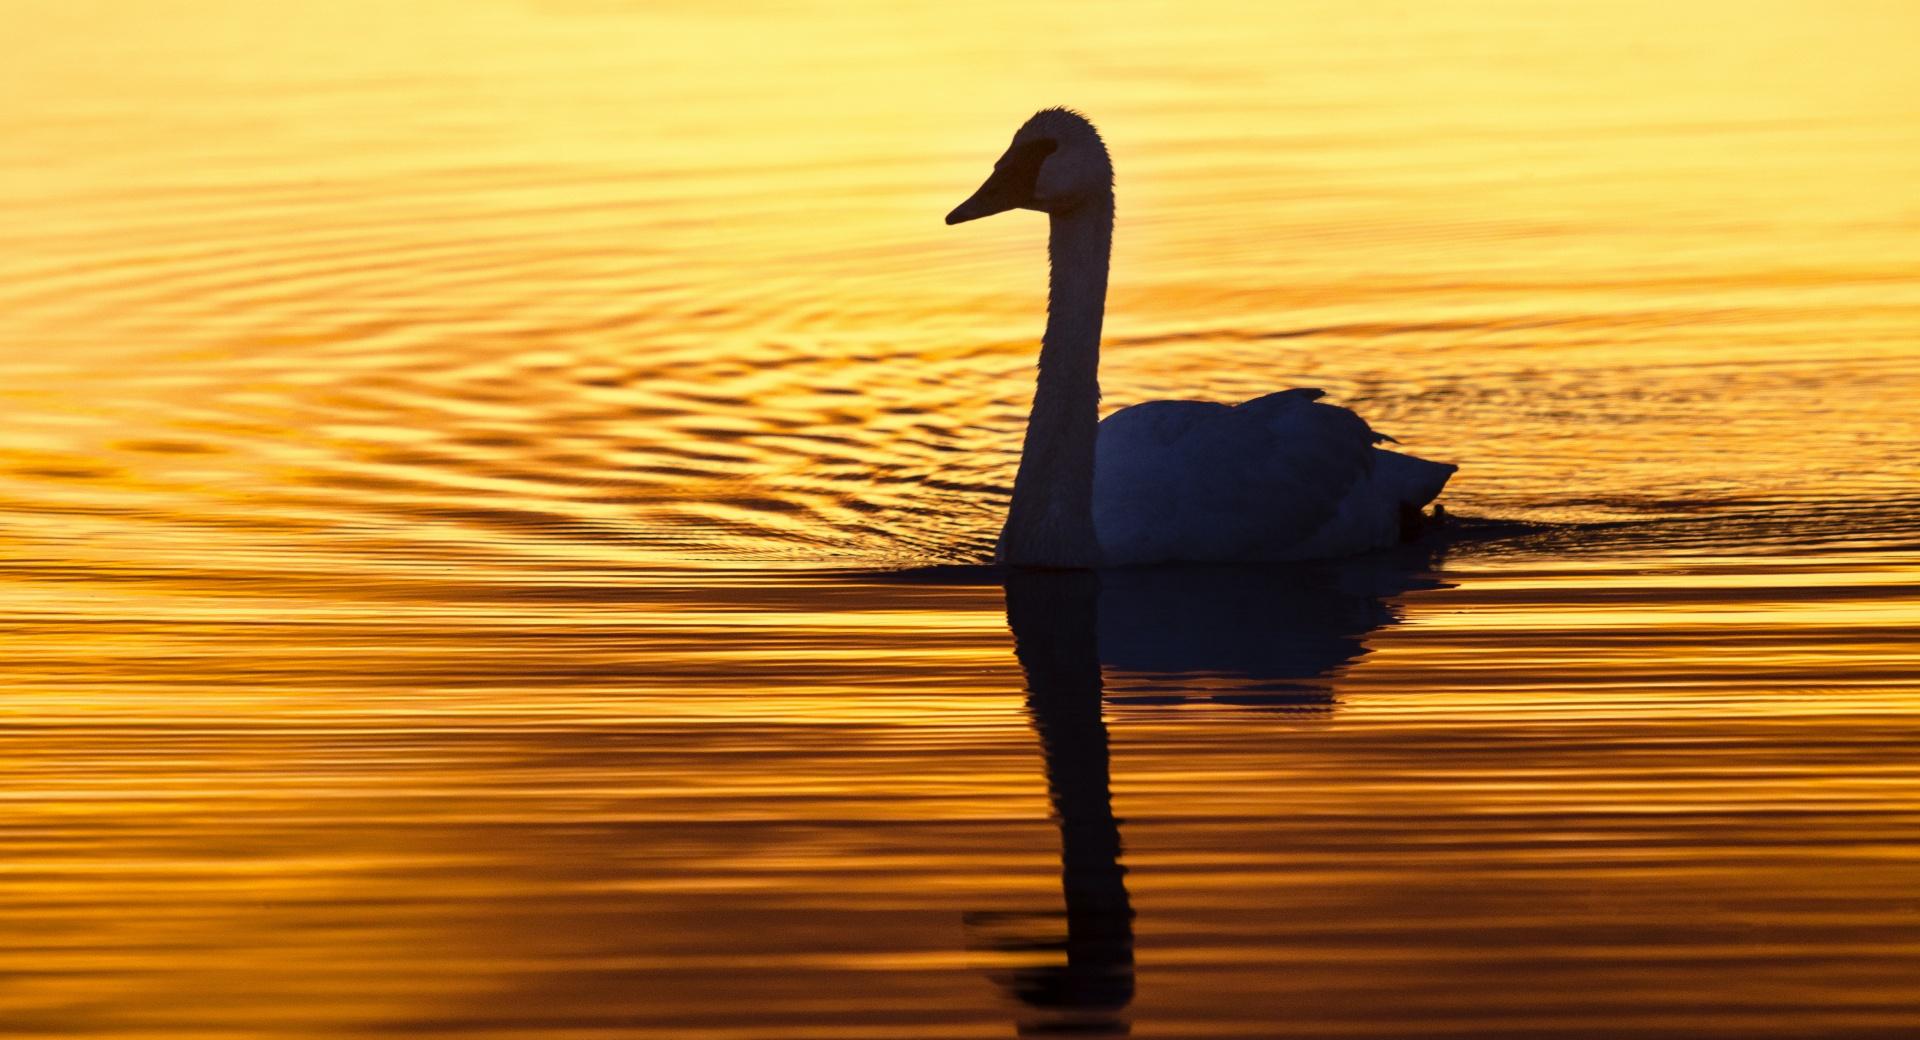 Swan in the Morning Light wallpapers HD quality